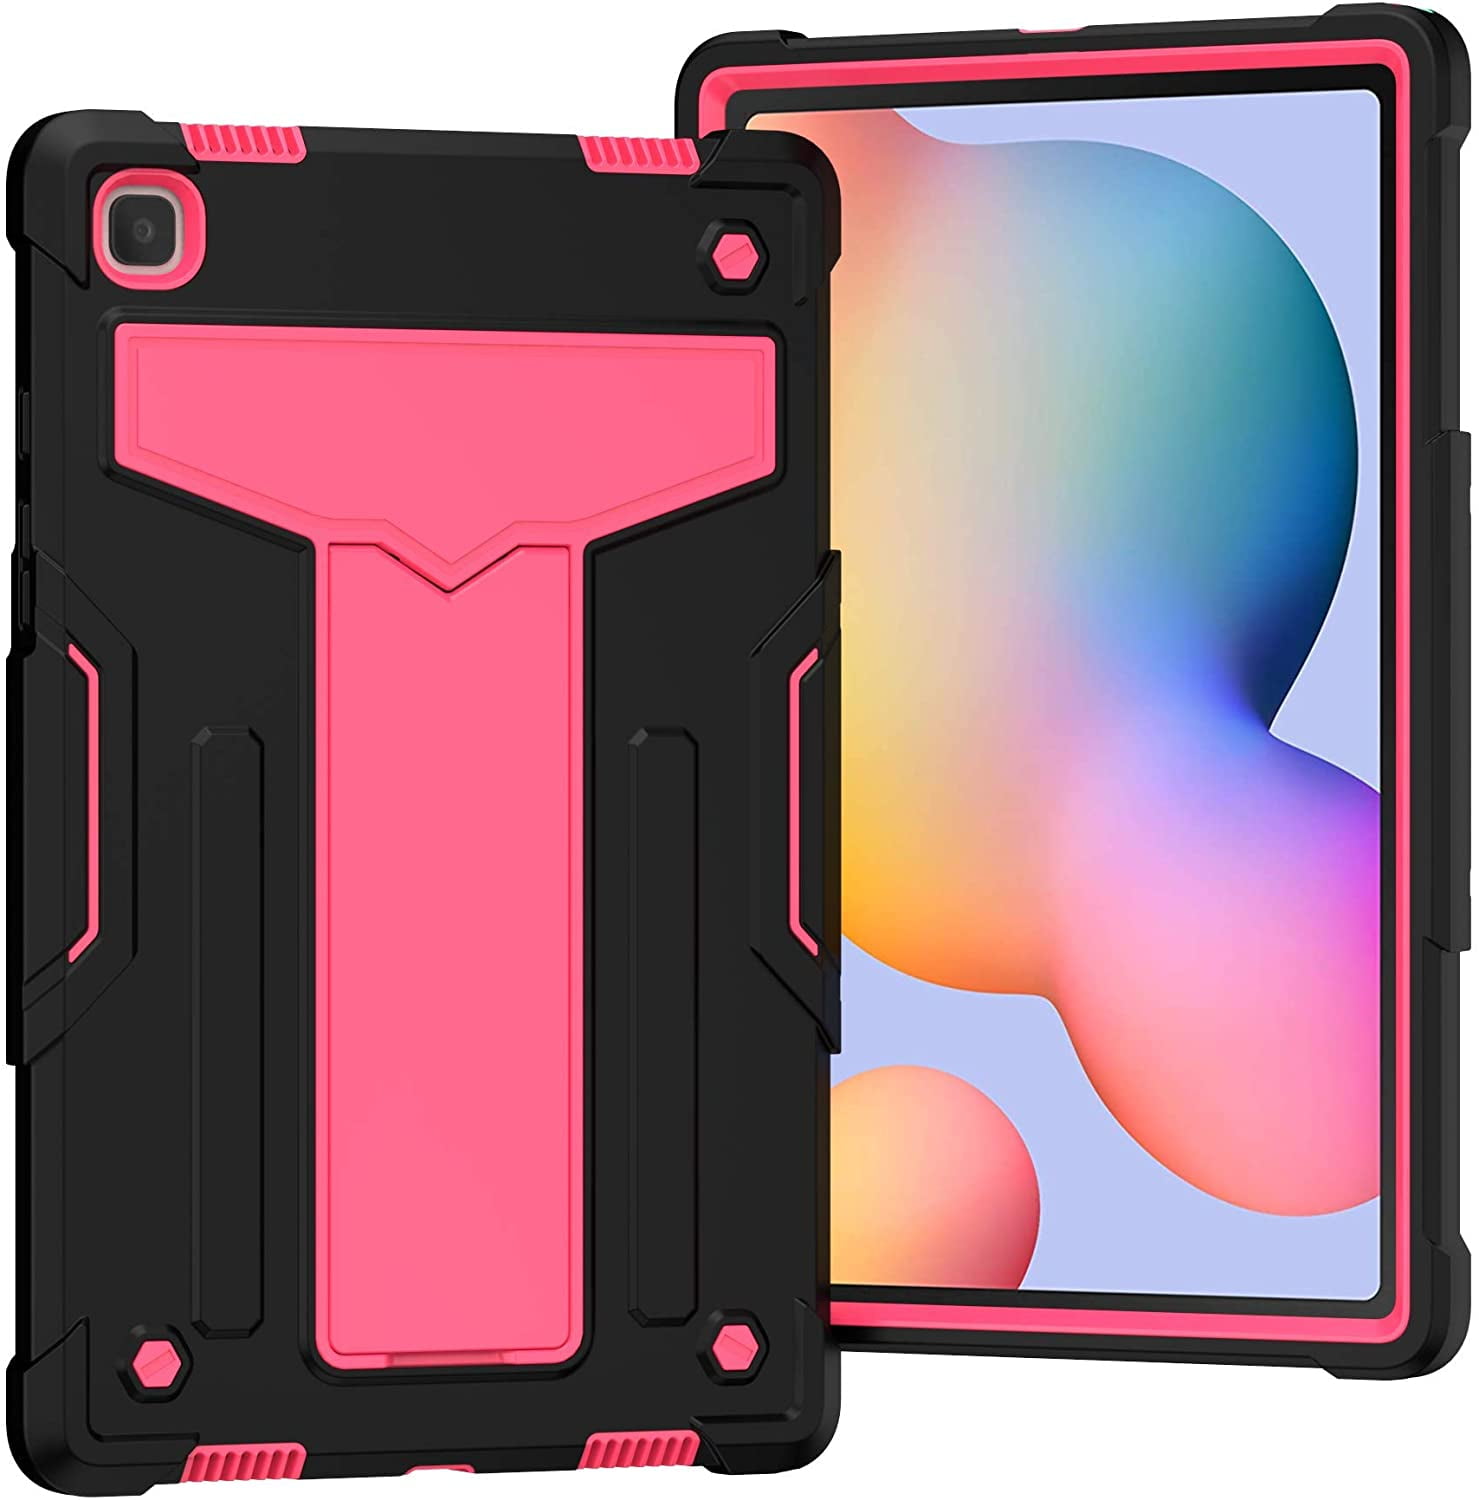 Maak avondeten natuurkundige Pathologisch Epicgadget Case for Samsung Galaxy Tab A7 10.4 SM-T500/T505/T507 (2020) -  Dual Layer Protective Hybrid Cover Case With Kickstand For Galaxy Tab A7  10.4 Inch Released in 2020 (Black/Pink) - Walmart.com